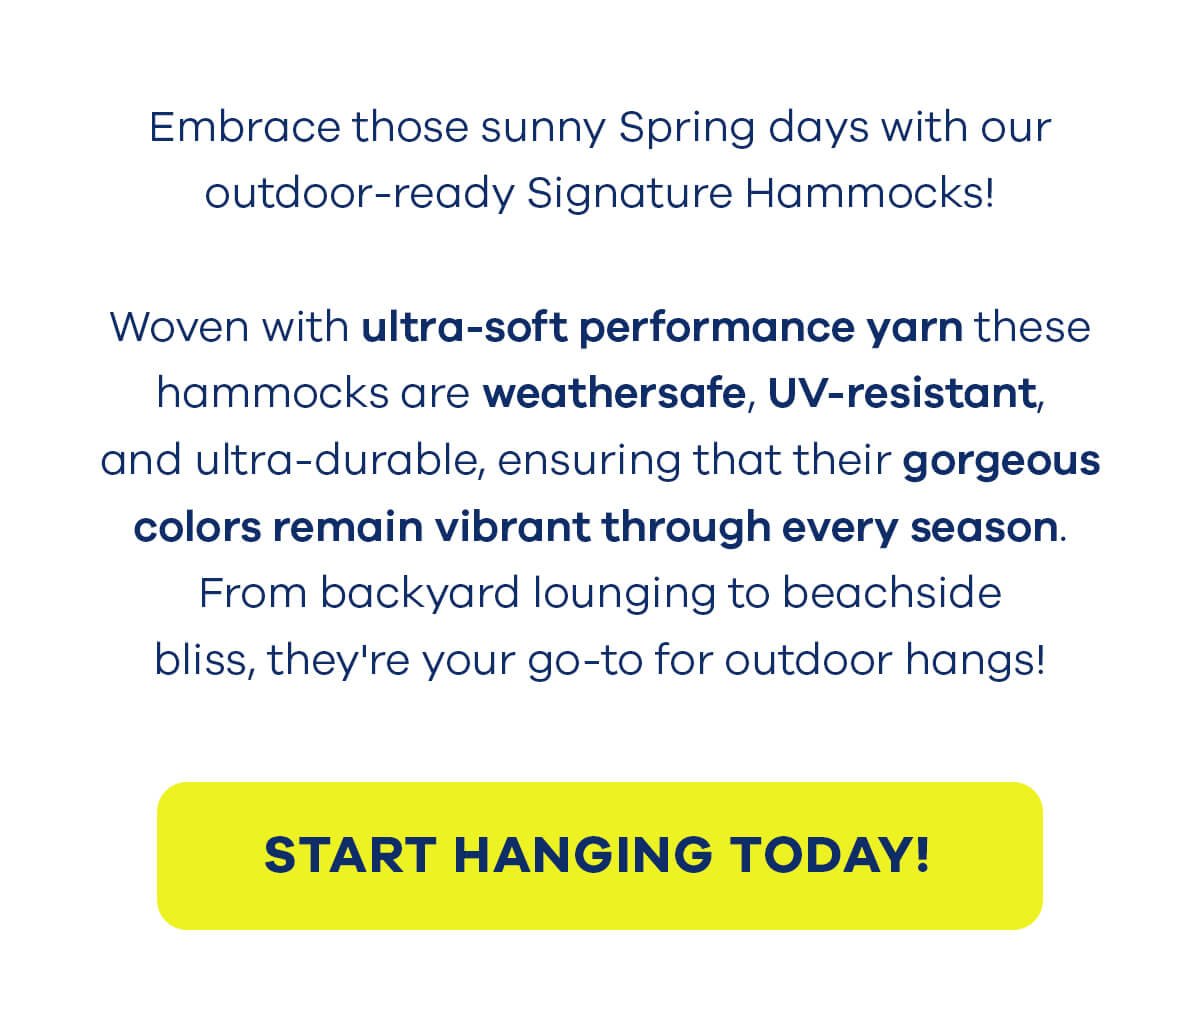 Embrace those sunny Spring days with our outdoor-ready Signature Hammocks! Woven with ultra-soft performance yarn these hammocks are weathersafe, UV-resistant, and ultra-durable, ensuring that their gorgeous colors remain vibrant through every season. From backyard lounging to beachside bliss, they're your go-to for outdoor hangs! START HANGING TODAY